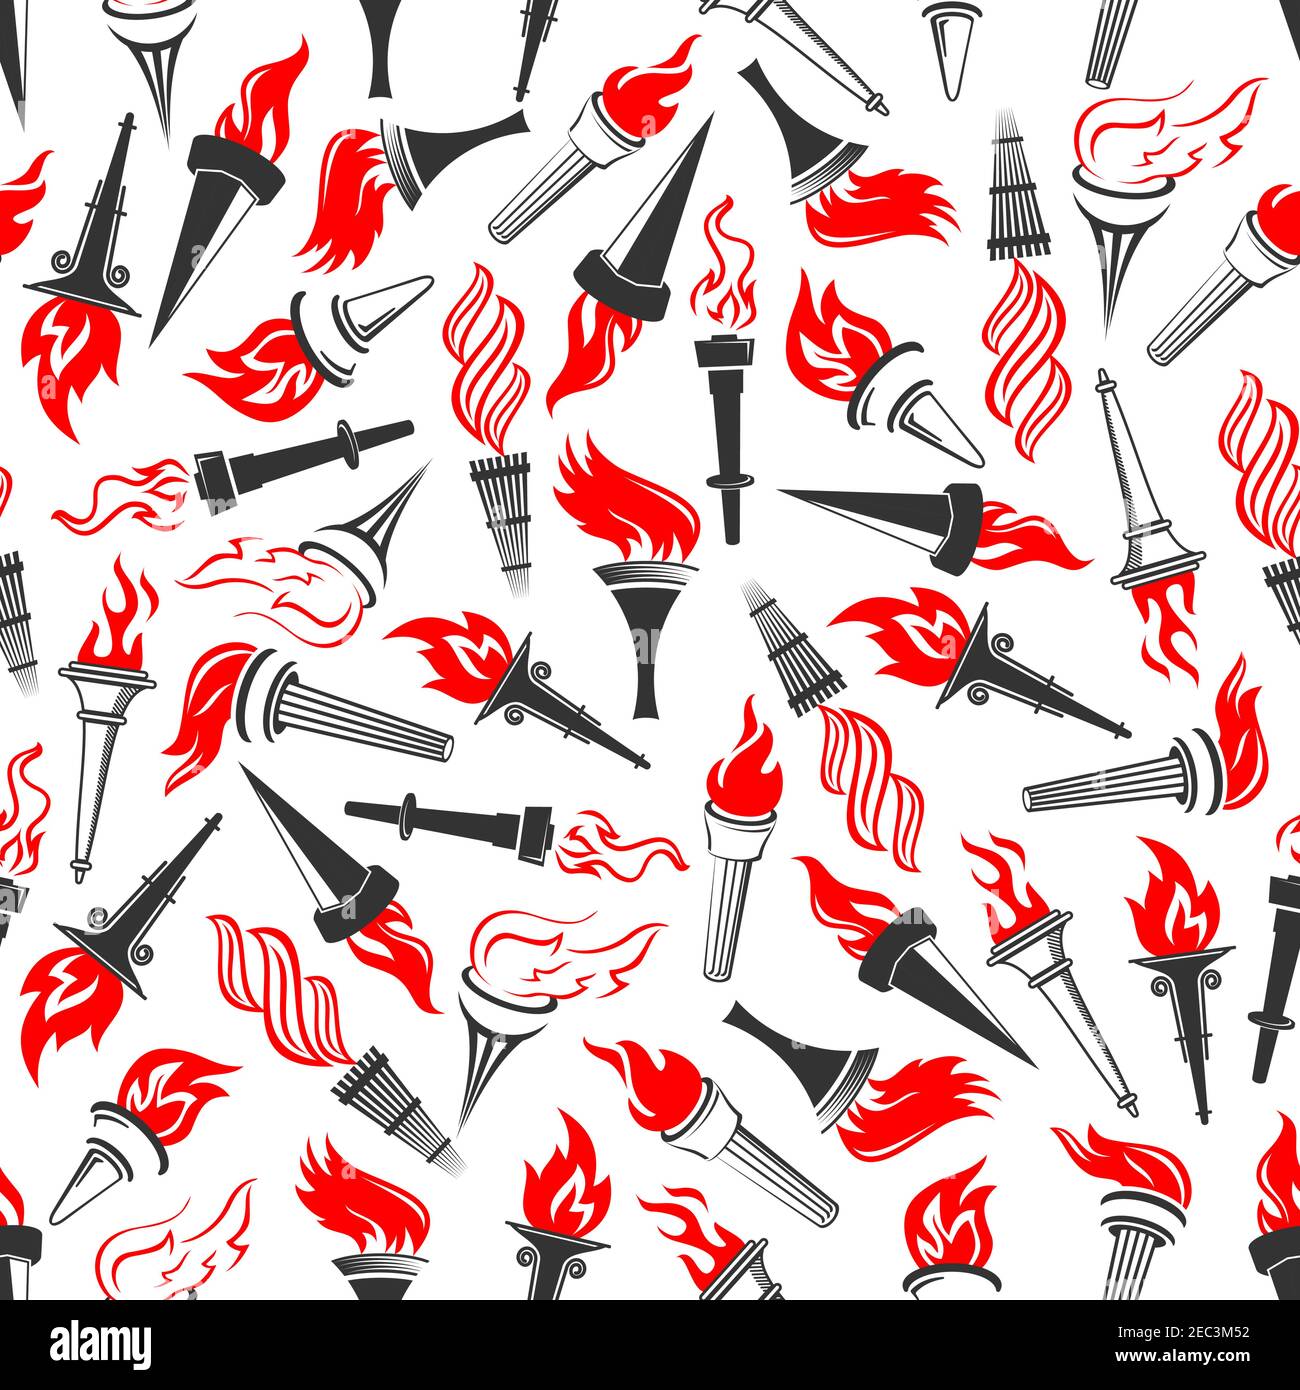 Seamless pattern of ancient greek burning torches with bright red flame swirls, randomly scattered on white background. Sporting competition, achievem Stock Vector